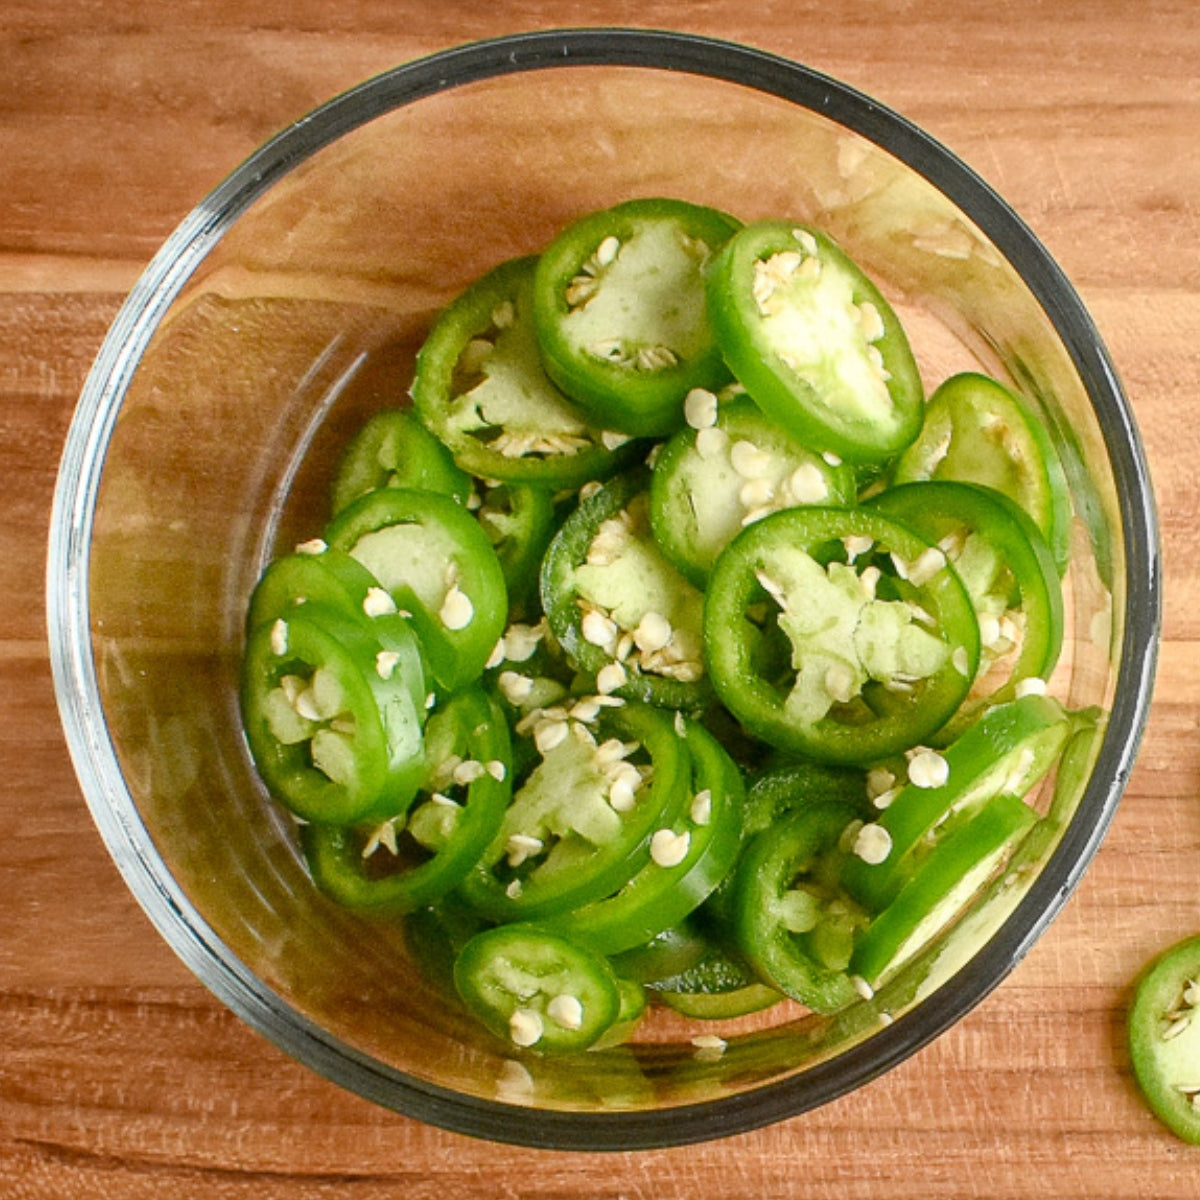 Jalapeño peppers in a glass jar on a cutting board.